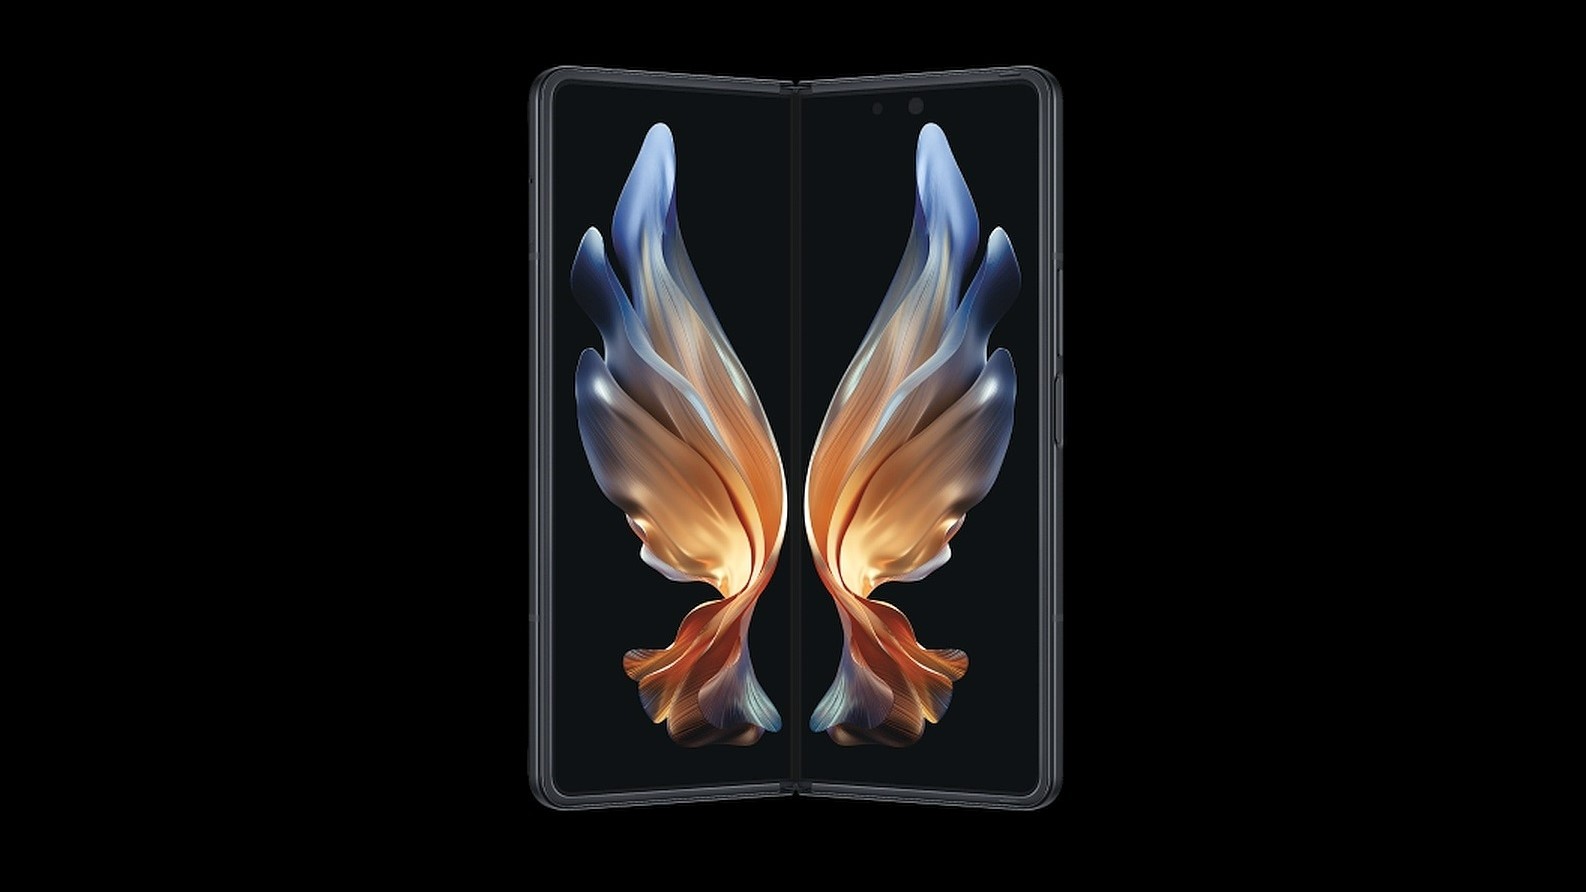 Samsung prepares to launch one other foldable smartphone in the form of the Galaxy Z Fold3